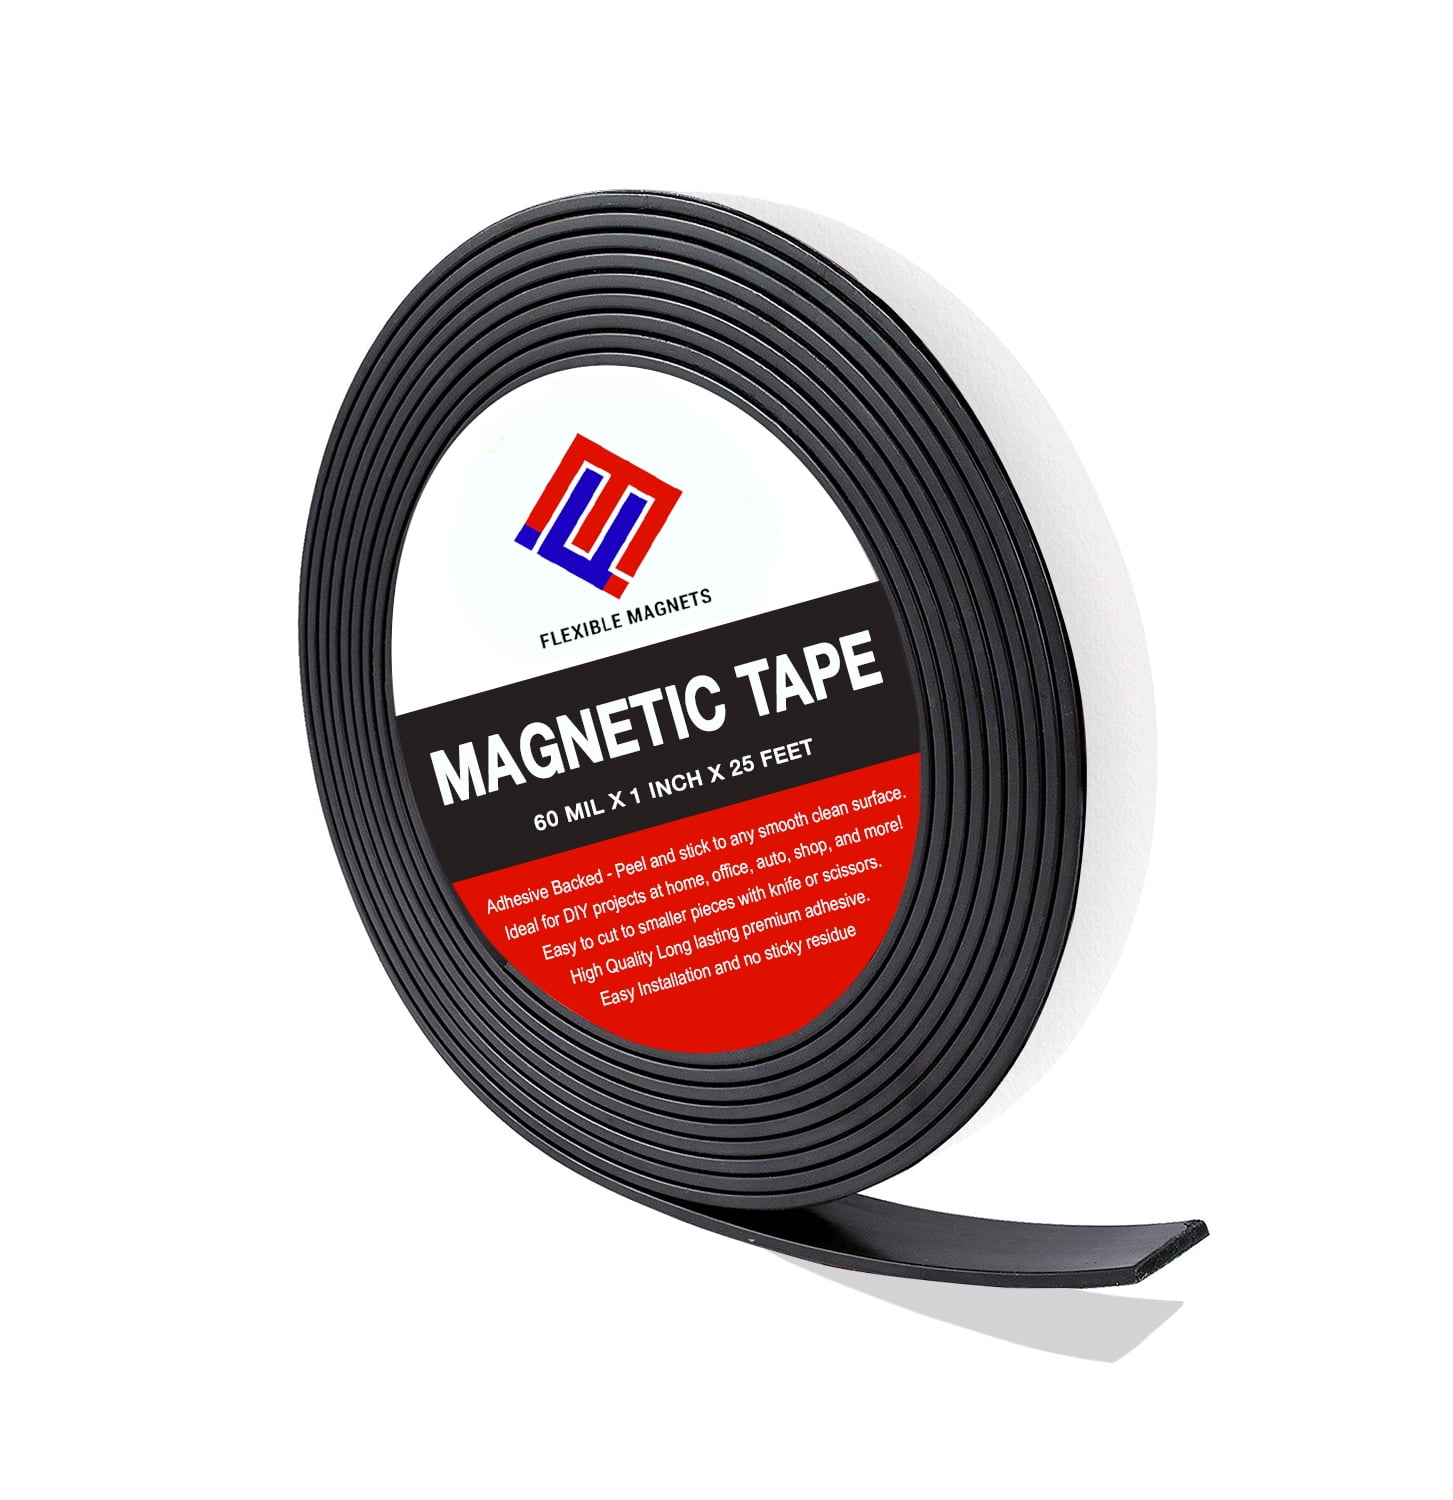 Flexible Magnetic Strip 1 inch x 10 Feet Magnetic Tape with Strong Self Adh... 